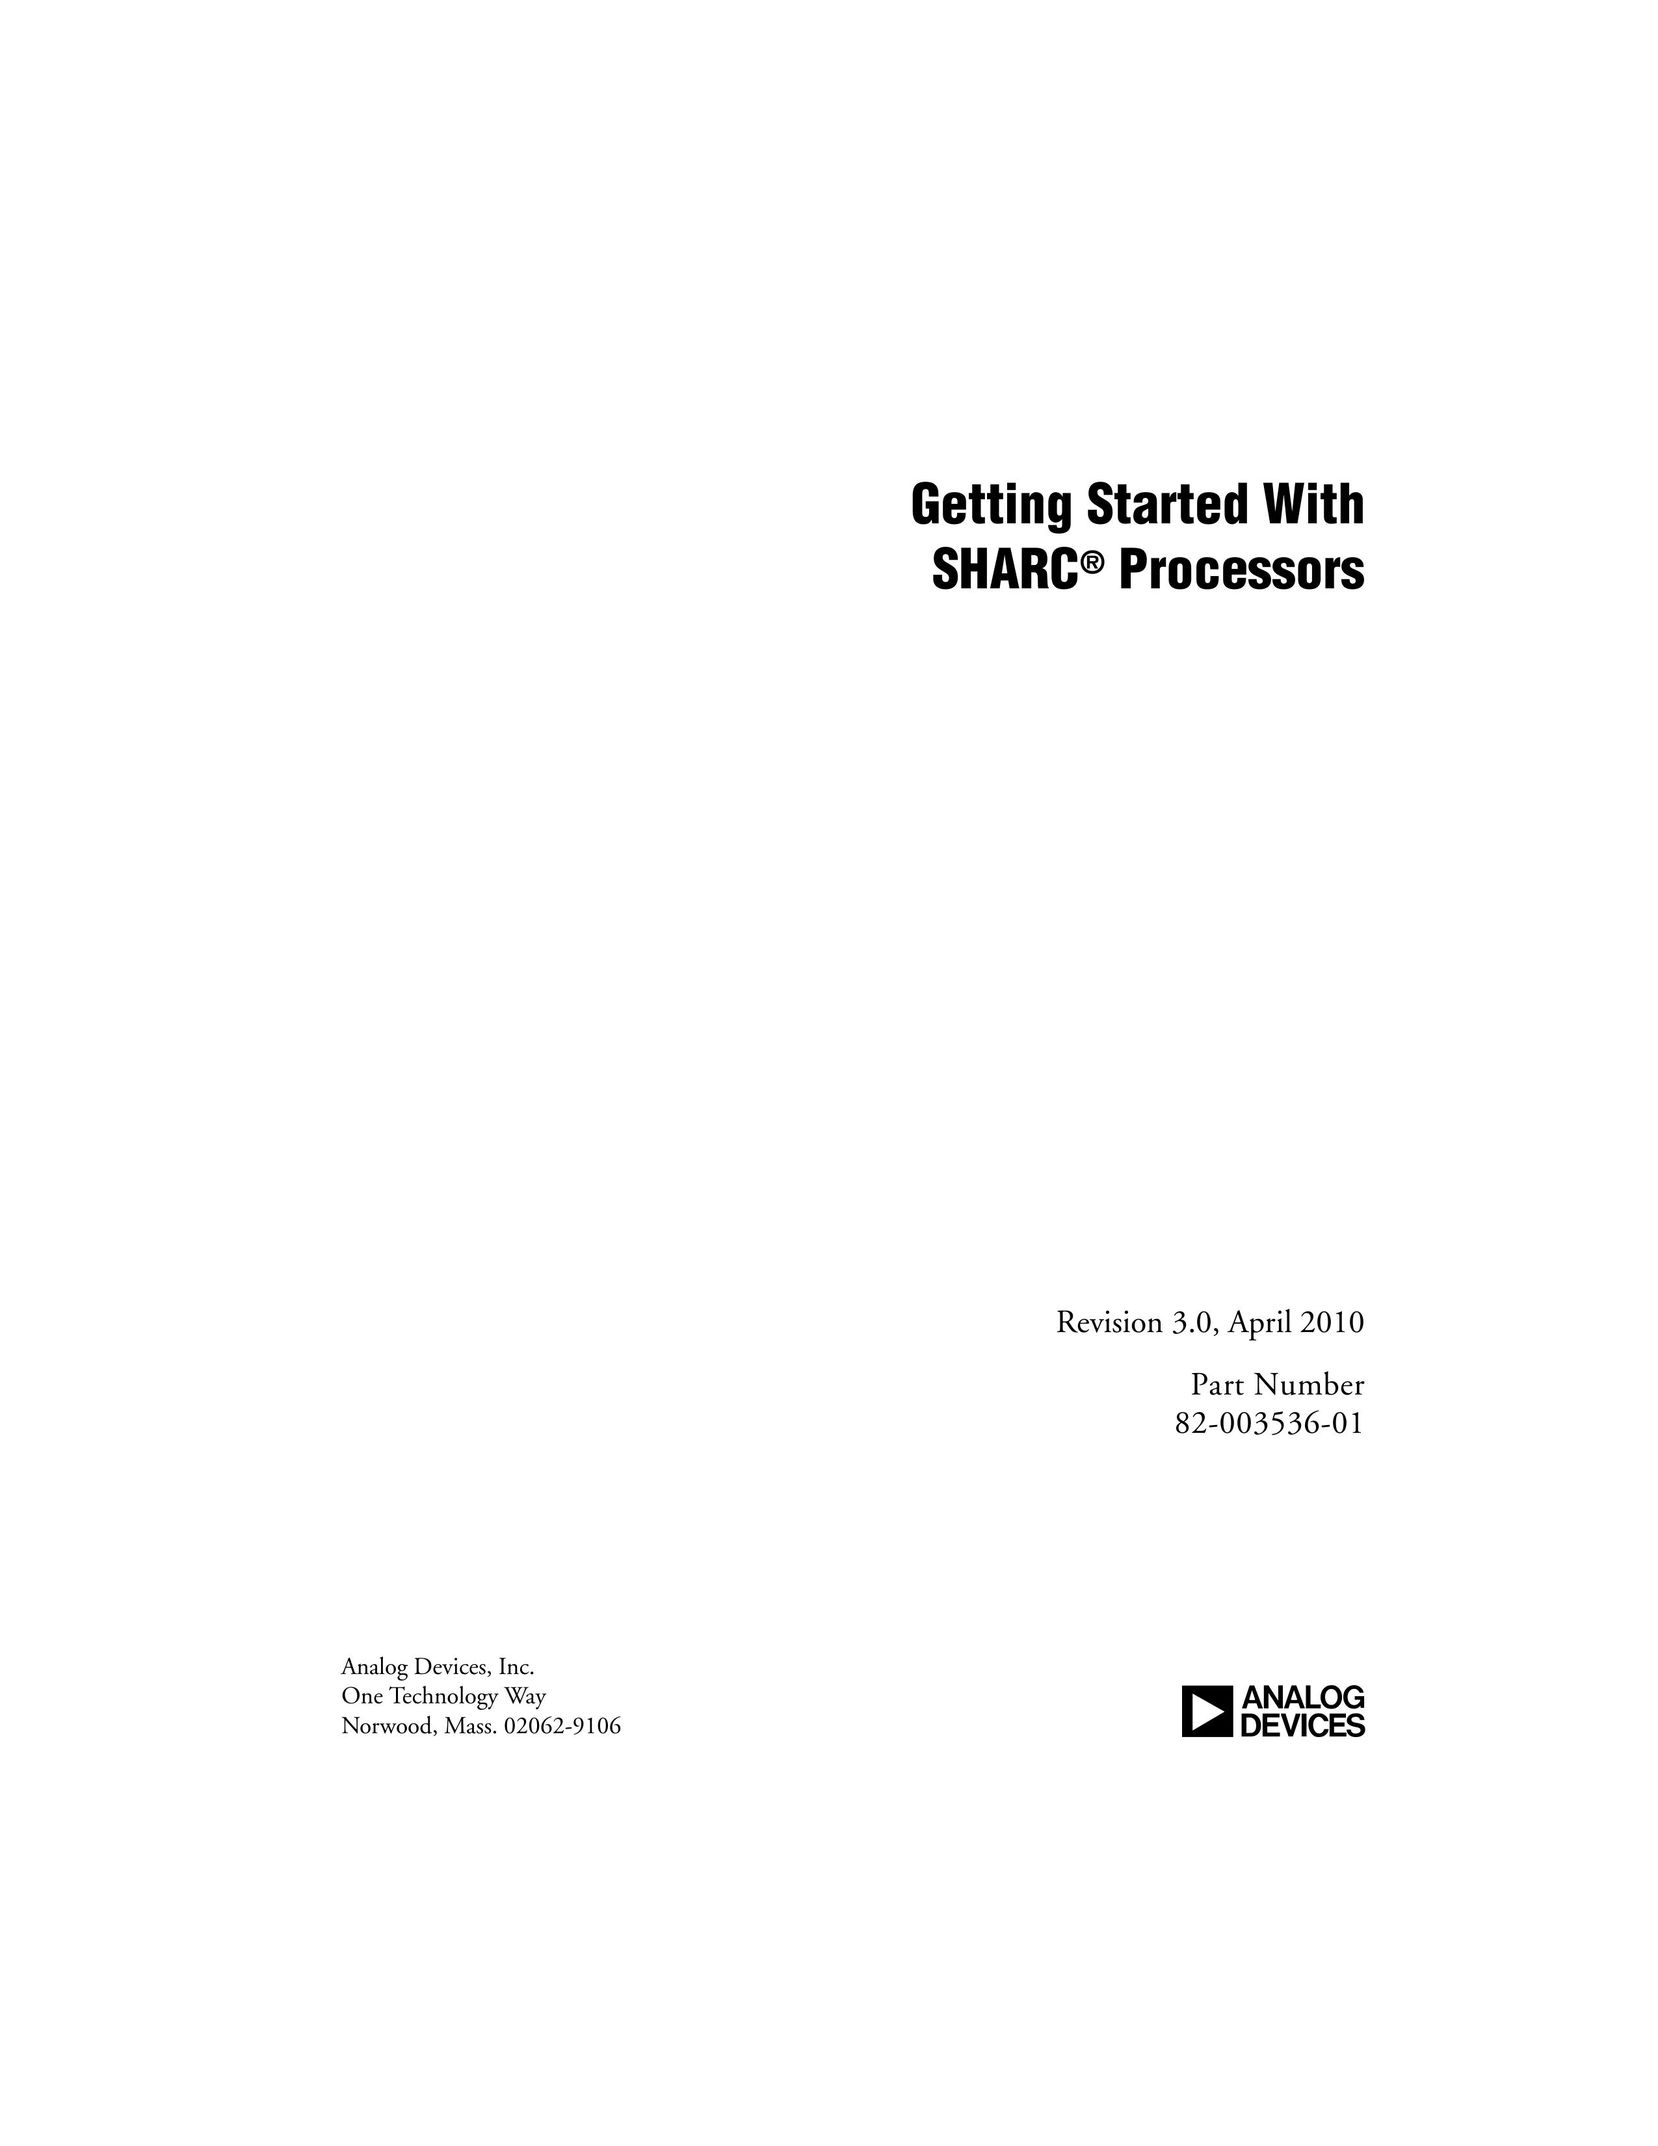 Analog Devices 82-003536-01 Stereo System User Manual